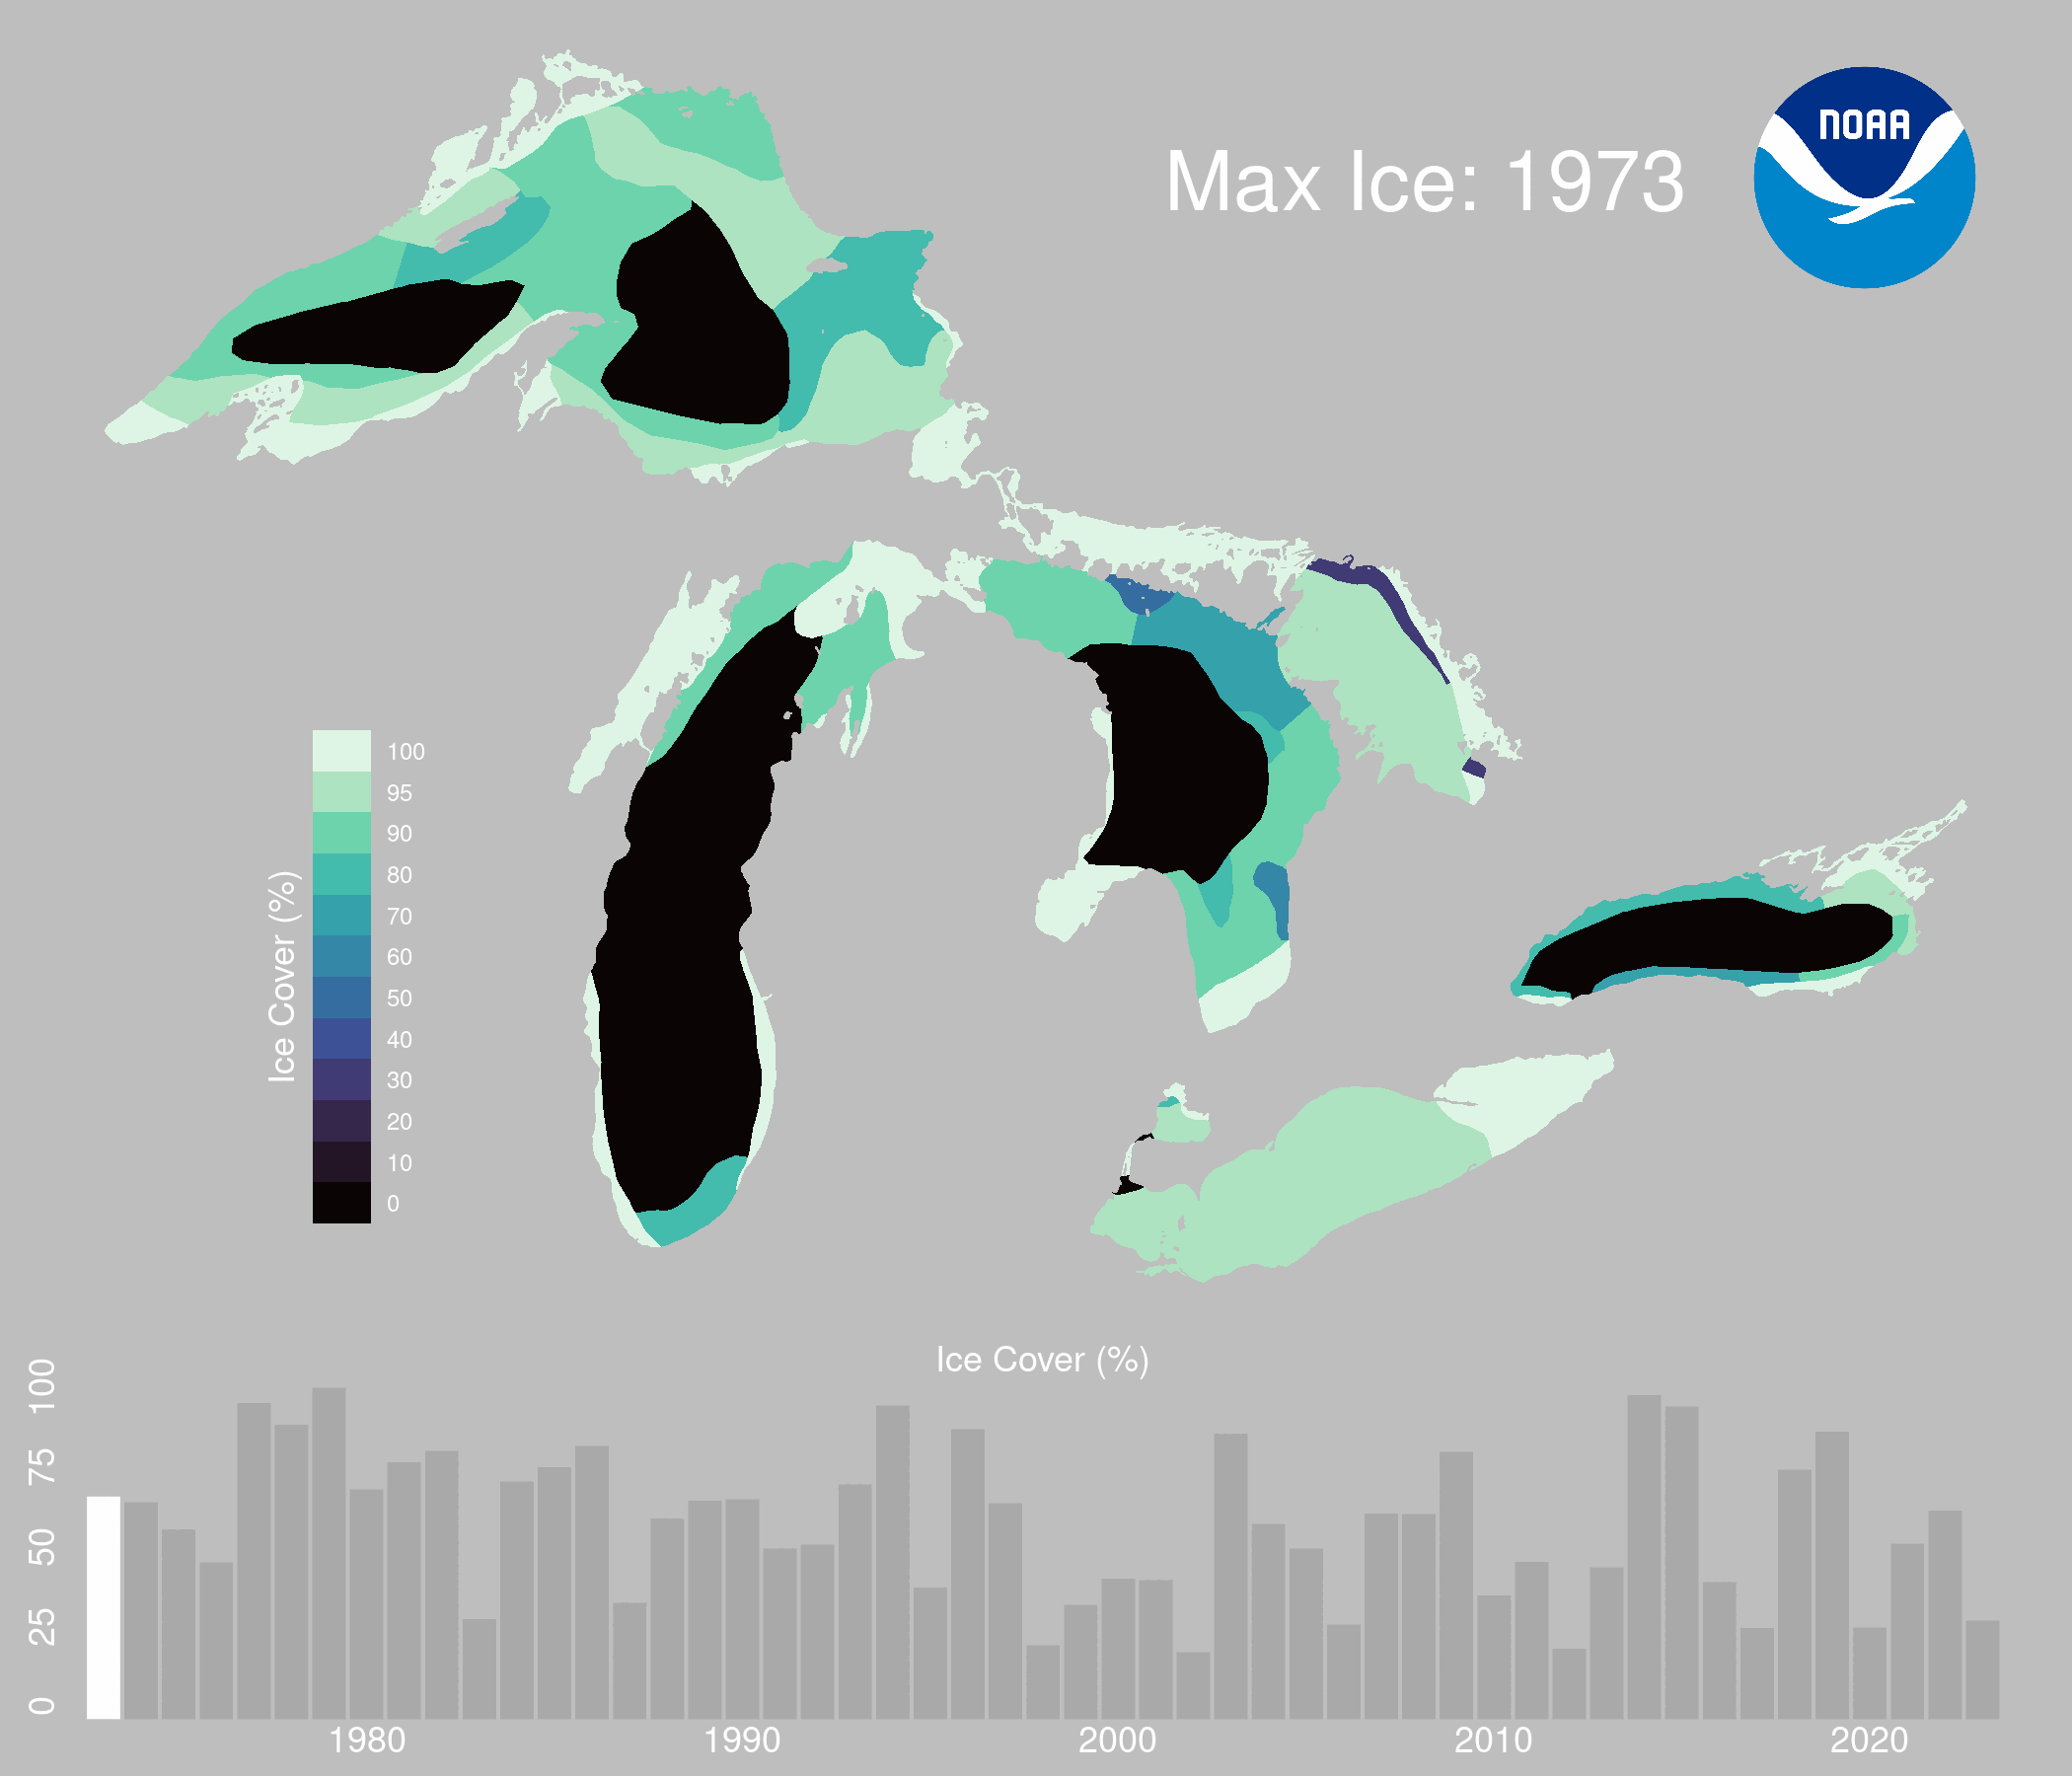 Animated GIF of Great Lakes Historical Ice Cover